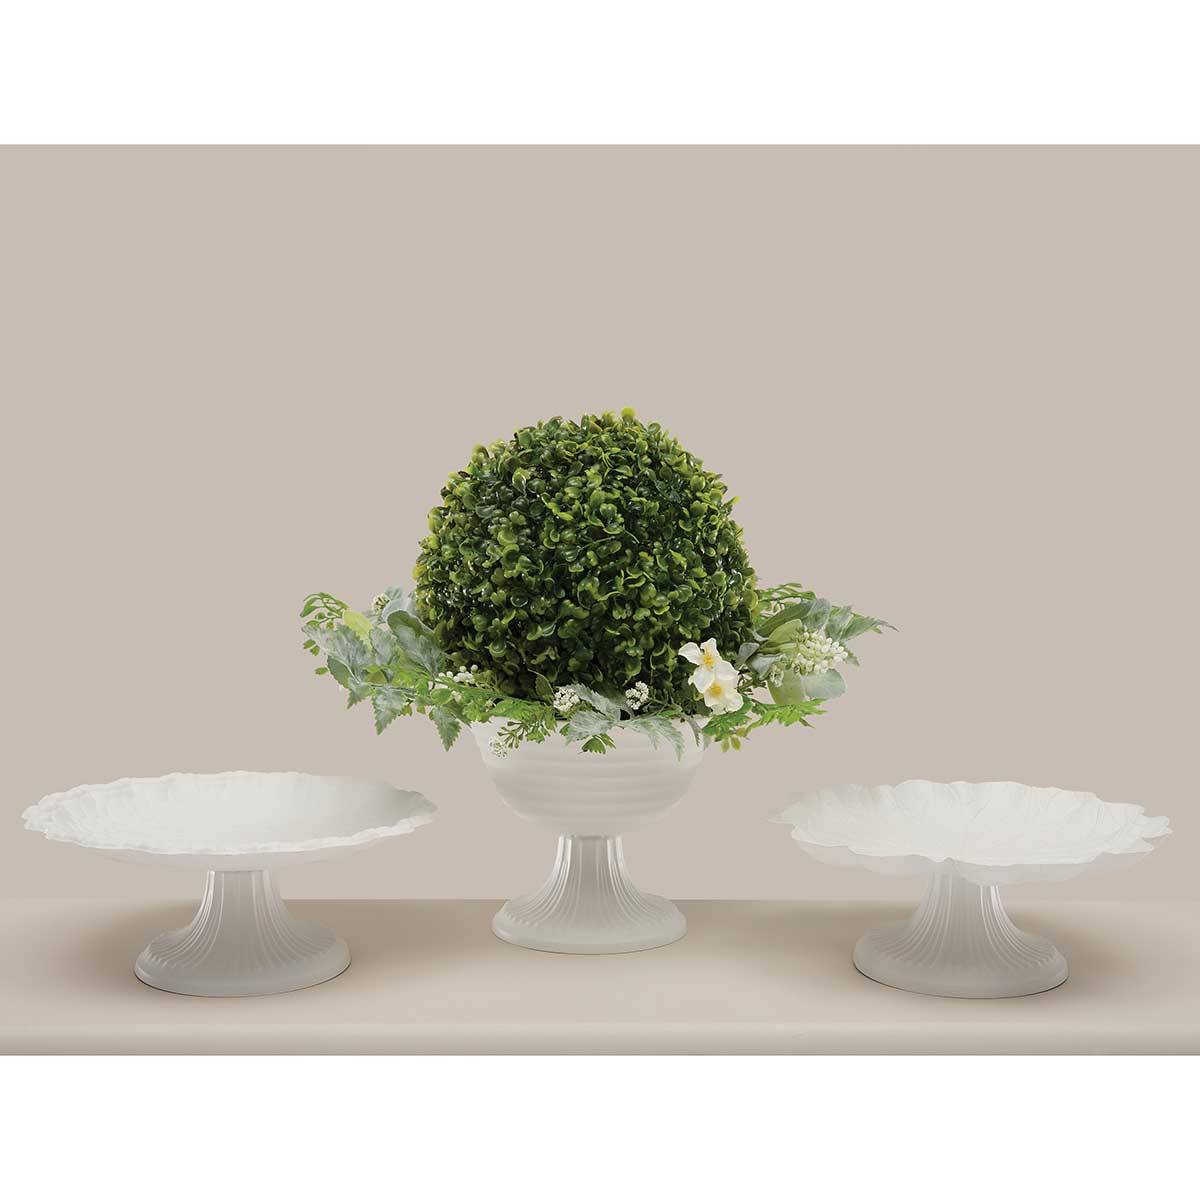 COMPOTE BOWL 7.75IN X 6.25IN MATTE WHITE METAL - Click Image to Close